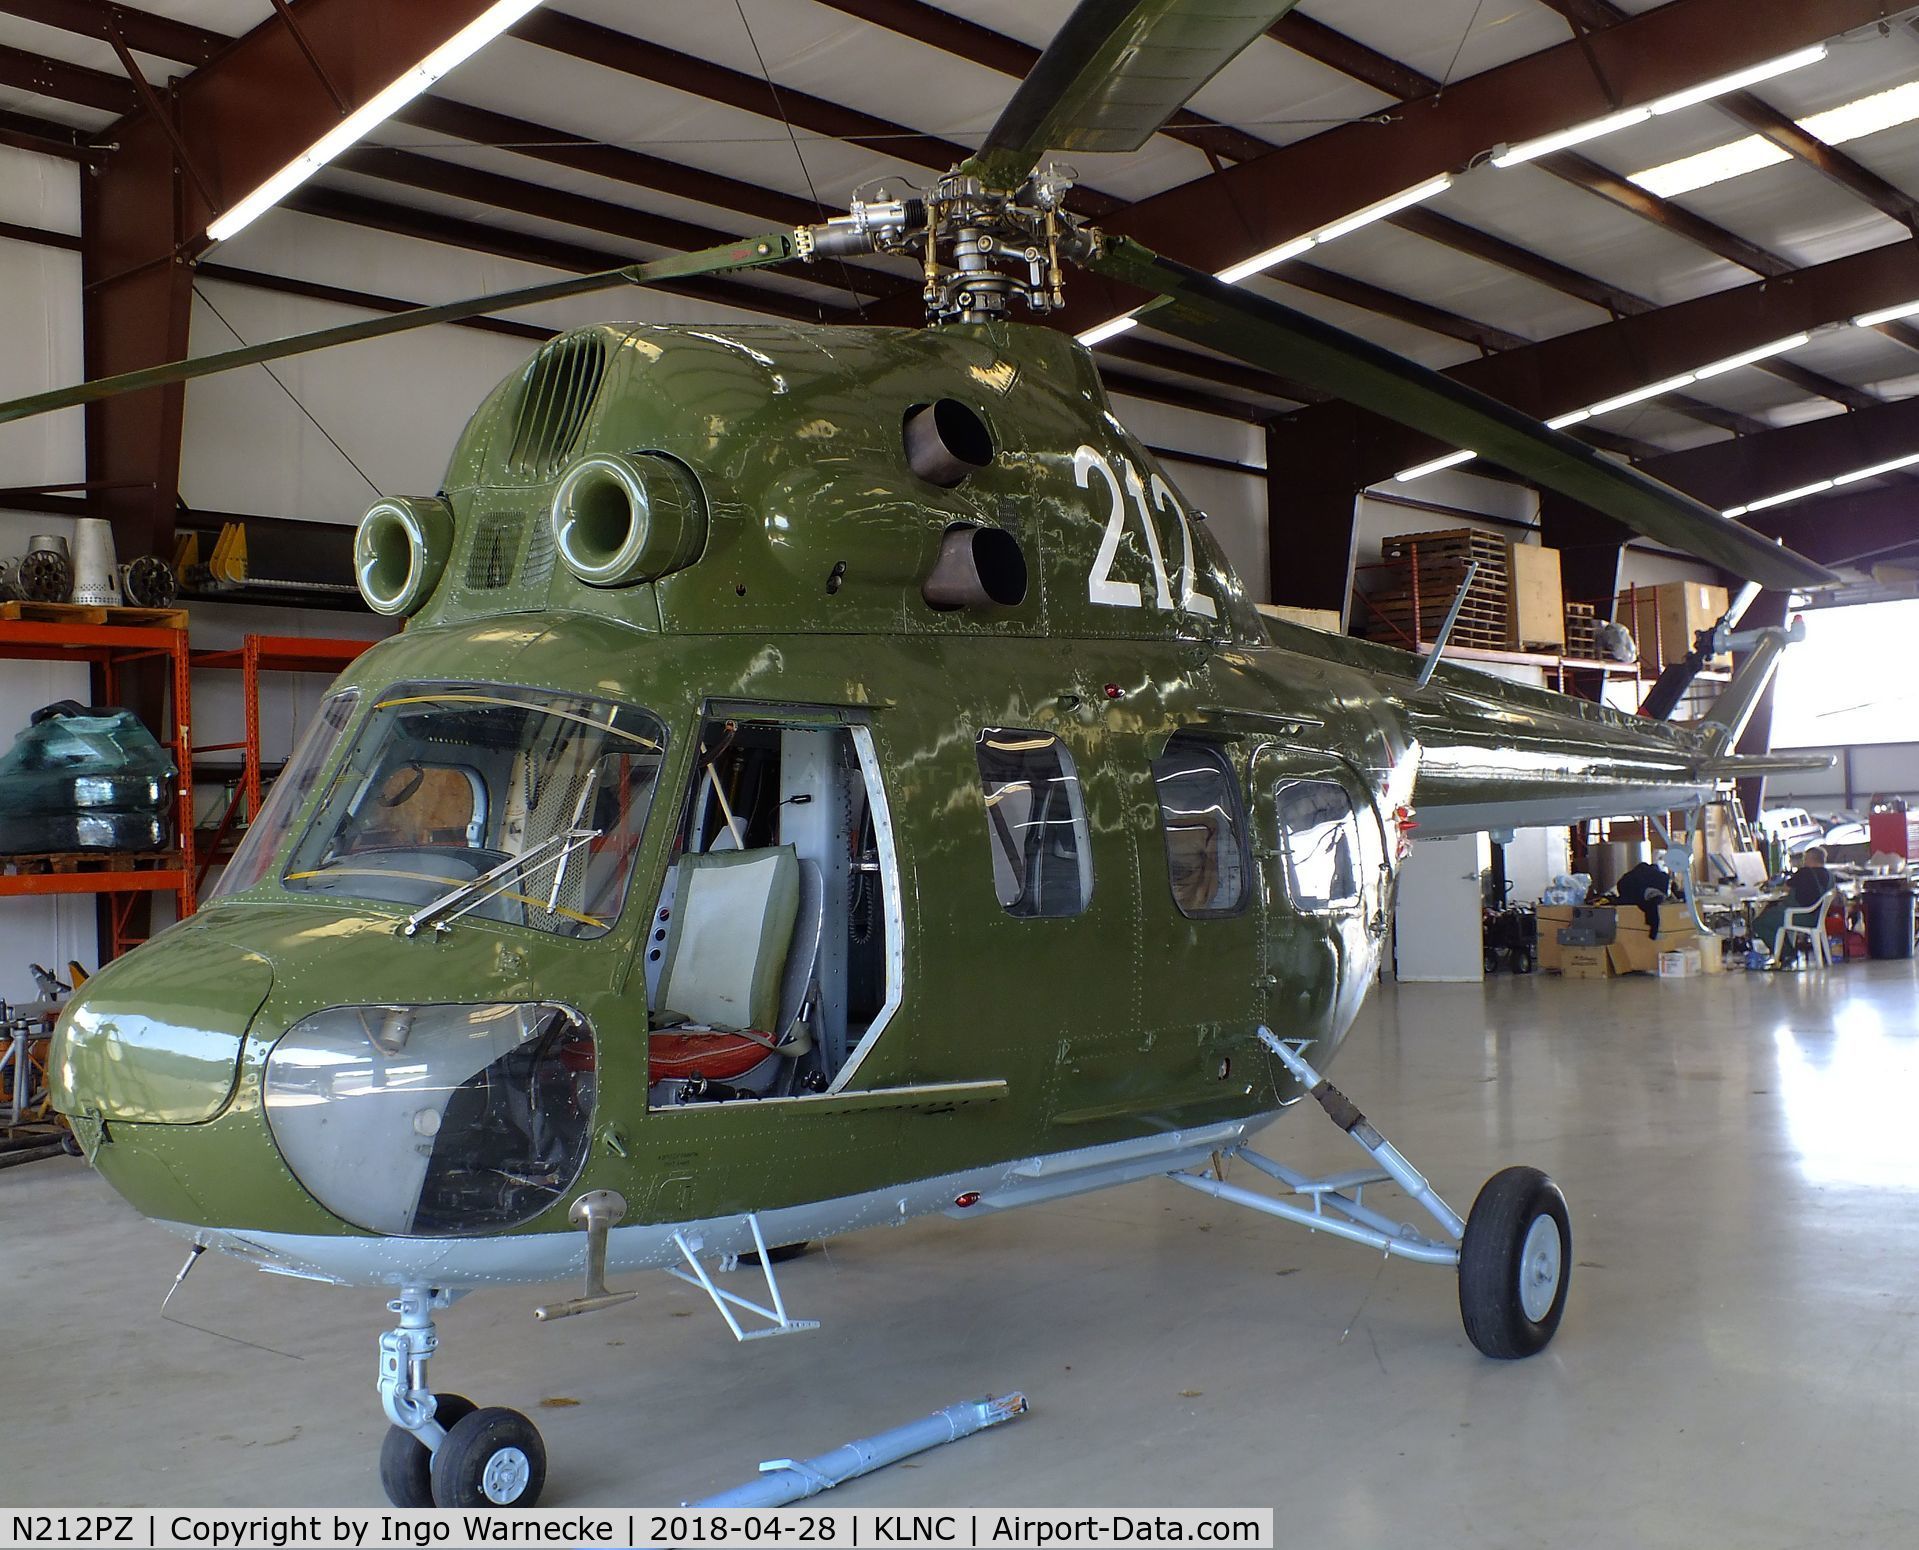 N212PZ, Mil MI-2 C/N 515249077, Mil Mi-2 HOPLITE in a hangar of the former Cold War Air Museum at Lancaster Regional Airport, Dallas County TX